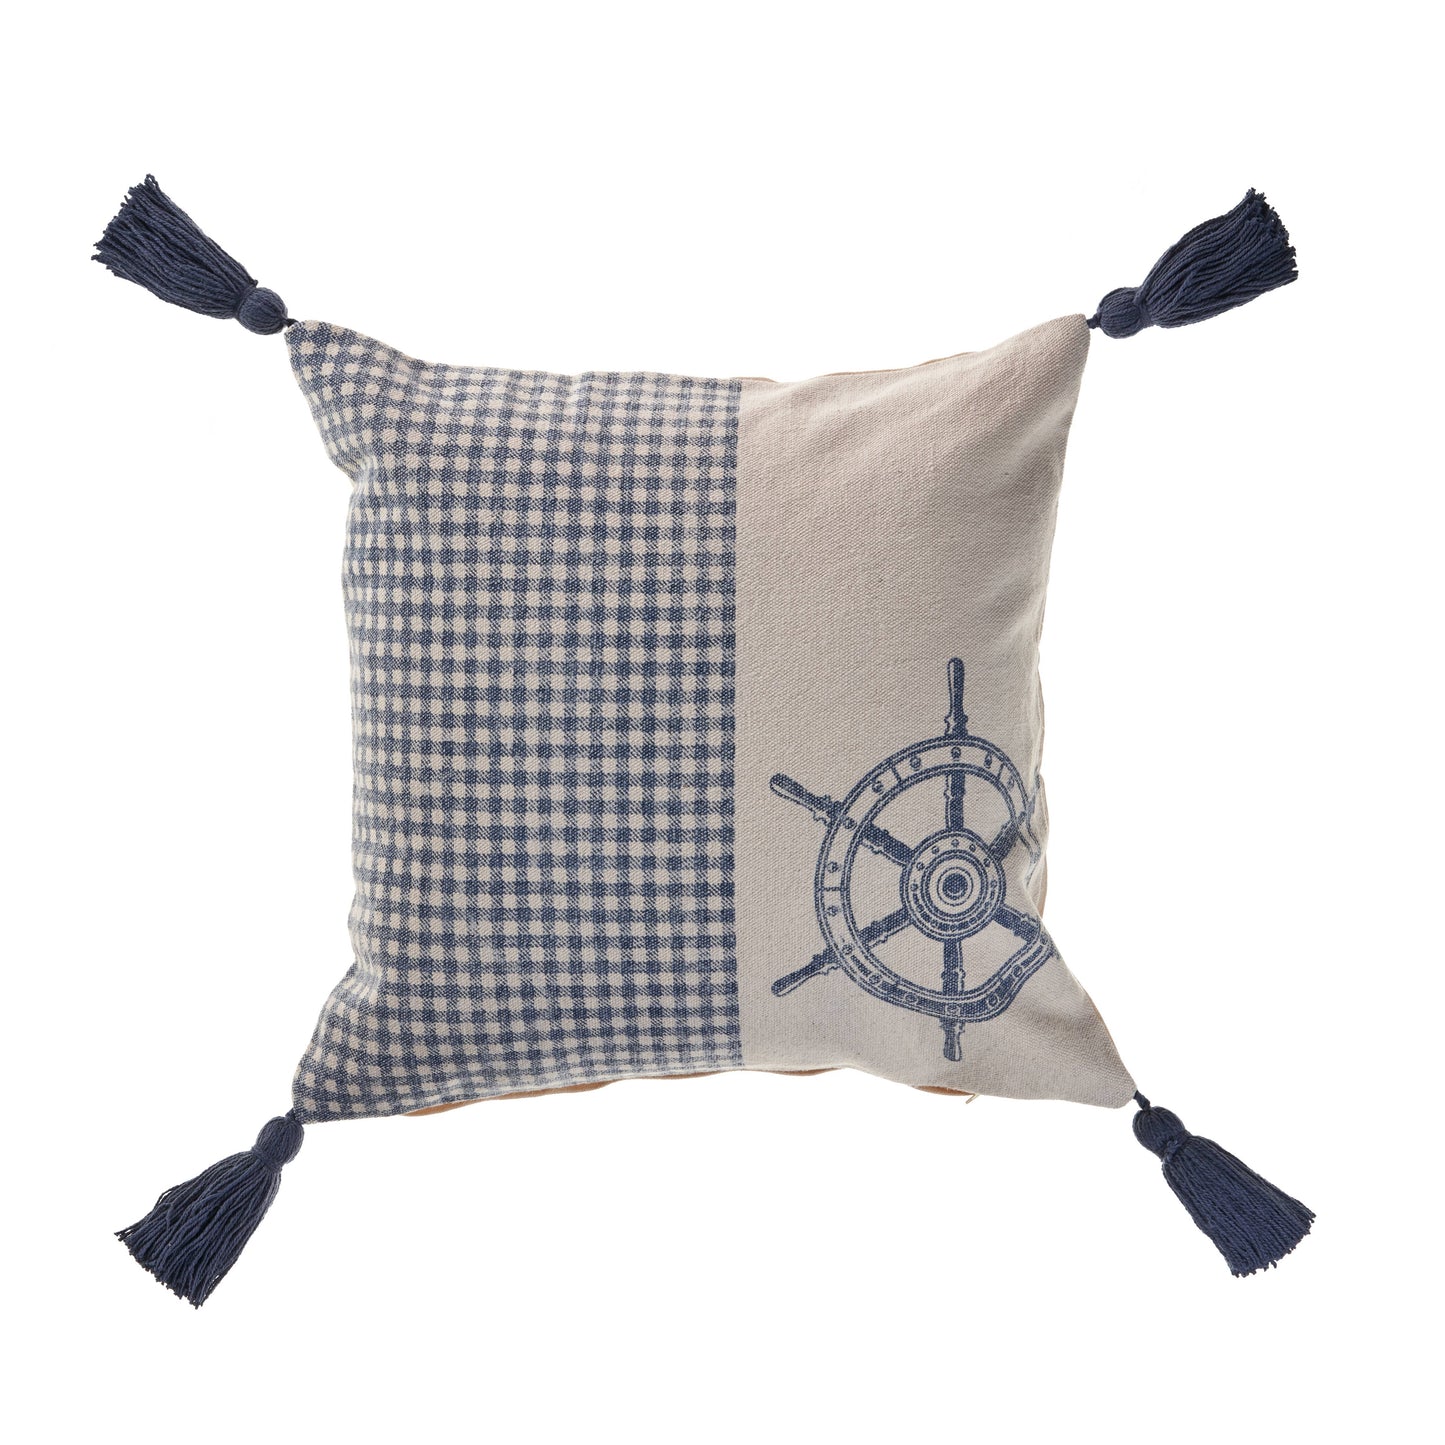 Steer the Way Nautical Gingham Throw Pillow